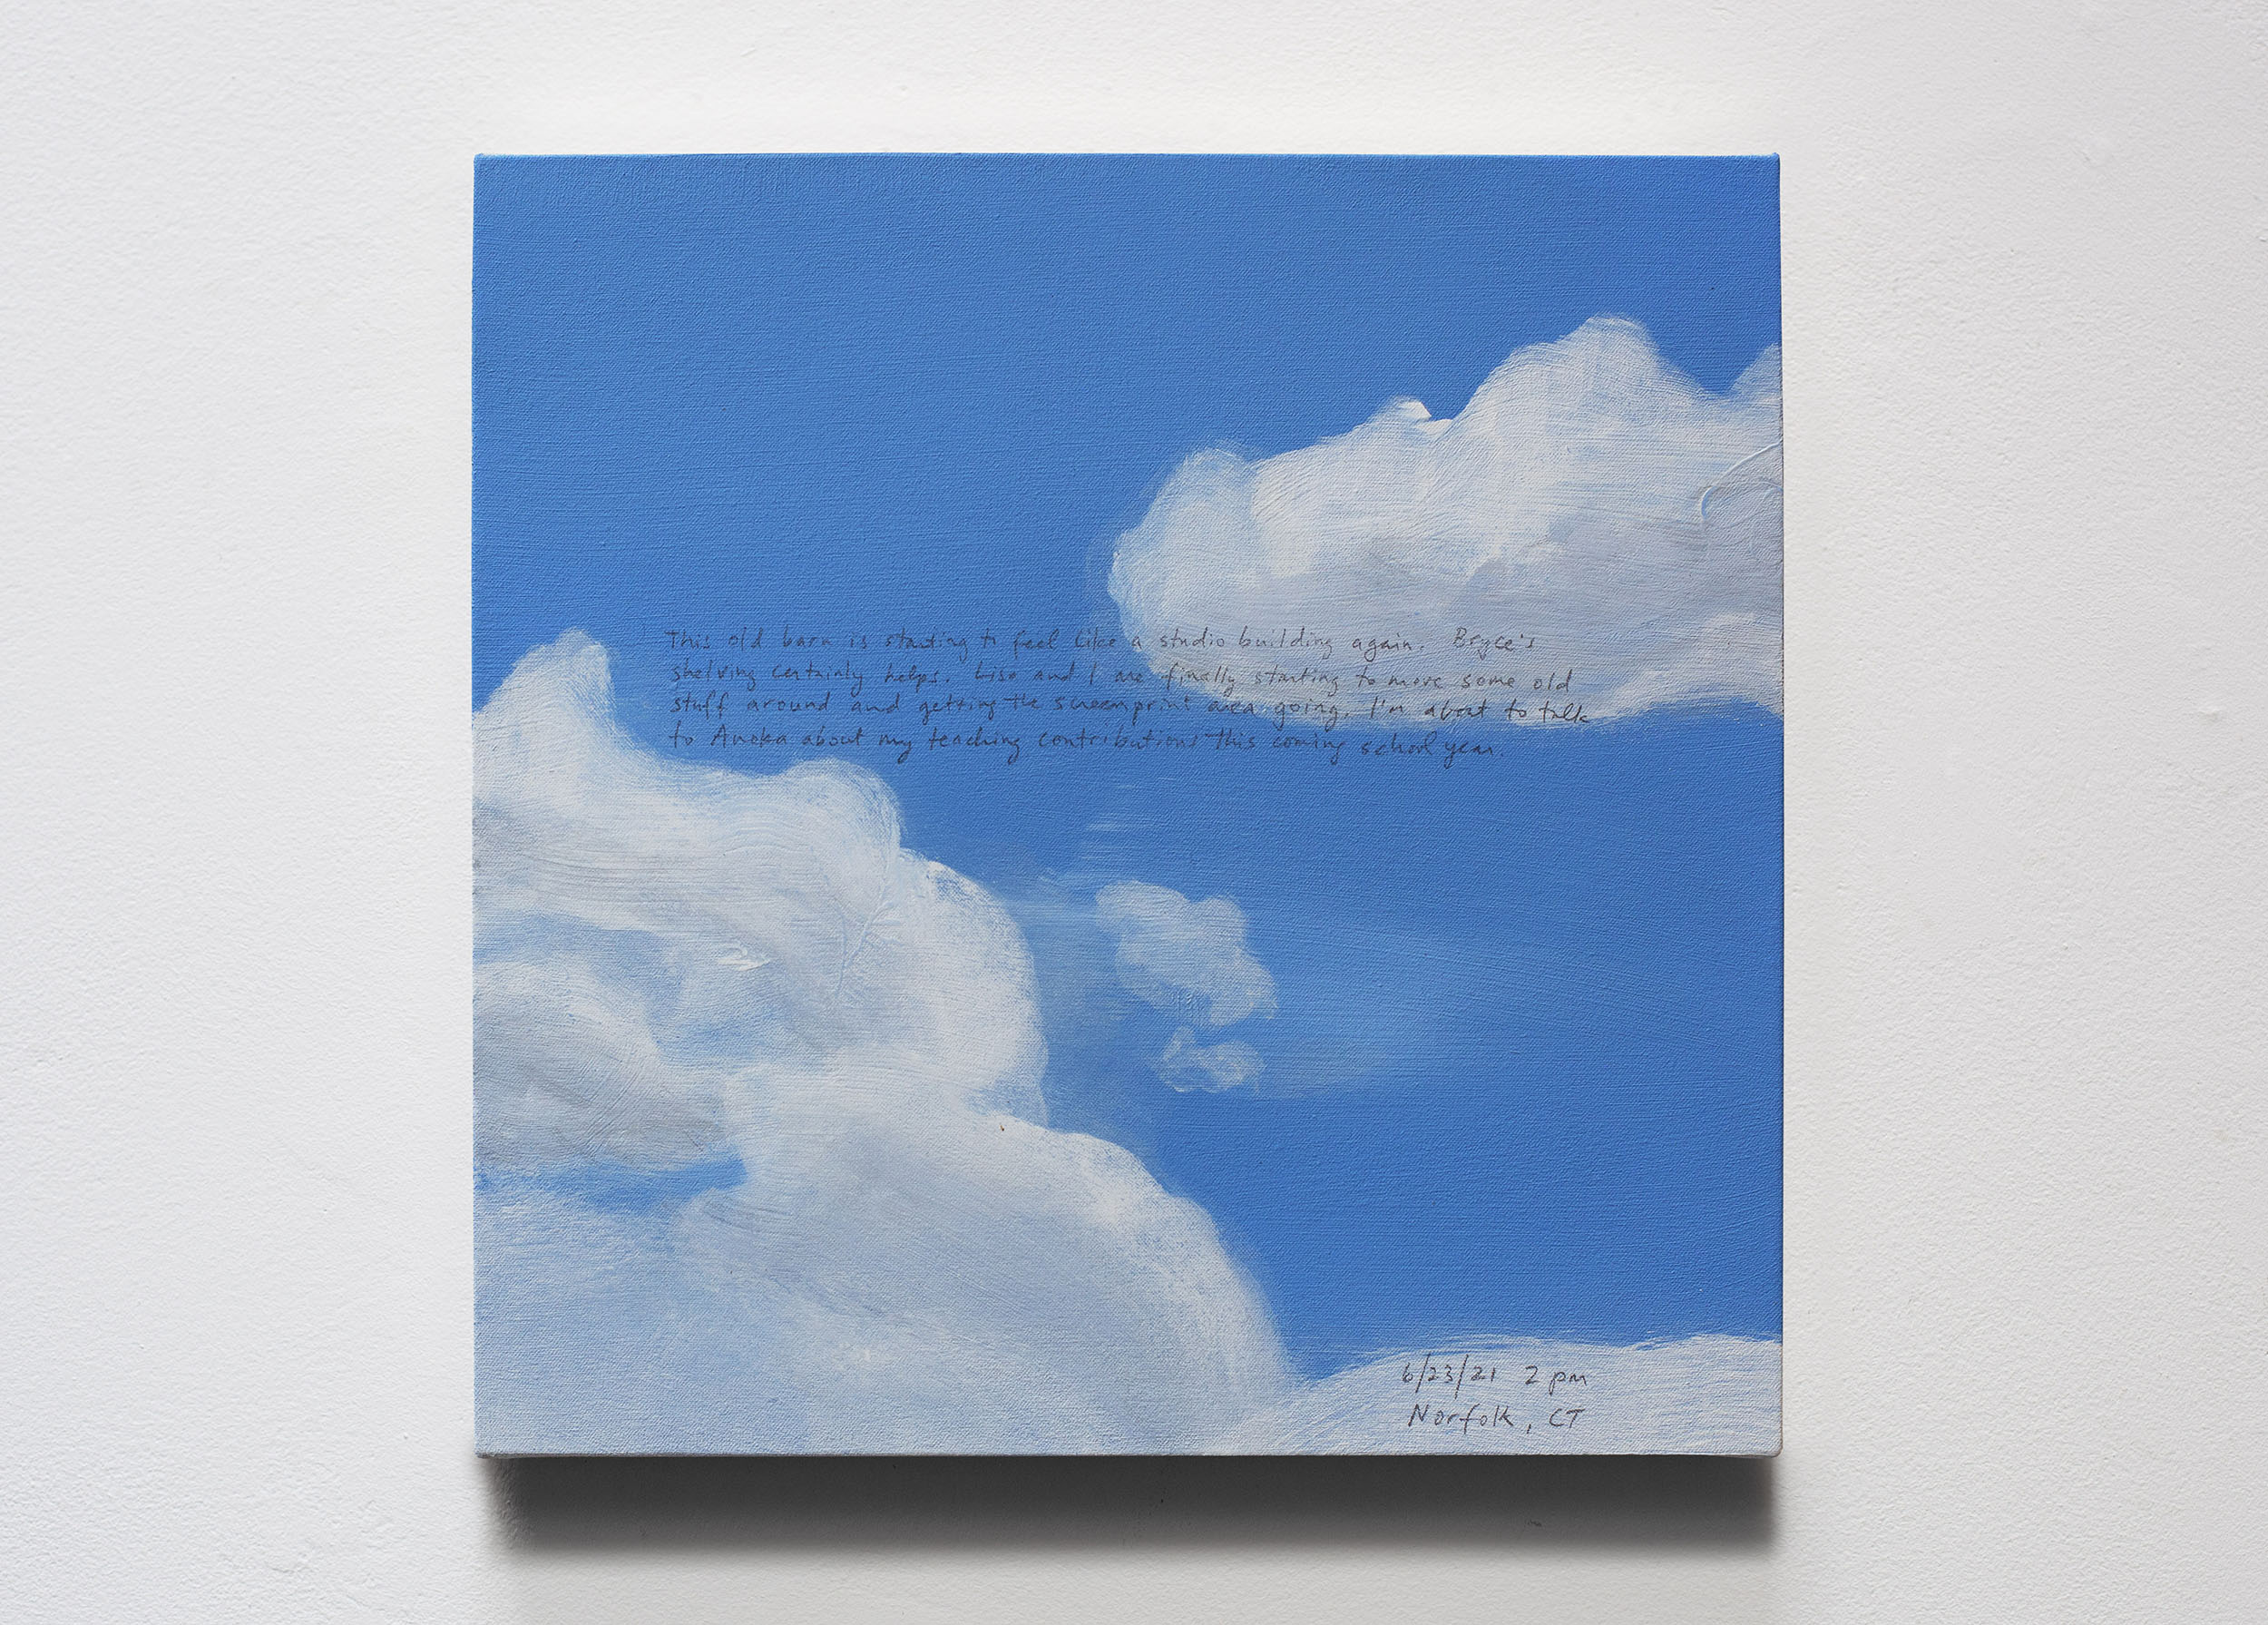 A 14 × 14 inch, acrylic painting of the sky. A journal entry is handwritten on the painting:

“This old barn is starting to feel like a studio building again. Bryce’s shelving certainly helps. Lisa and I are finally starting to move some old stuff around and getting the screenprint area going. I’m about to talk to Anoka about my teaching contributions this coming school year.

6/23/21 2 pm
Norfolk, CT”